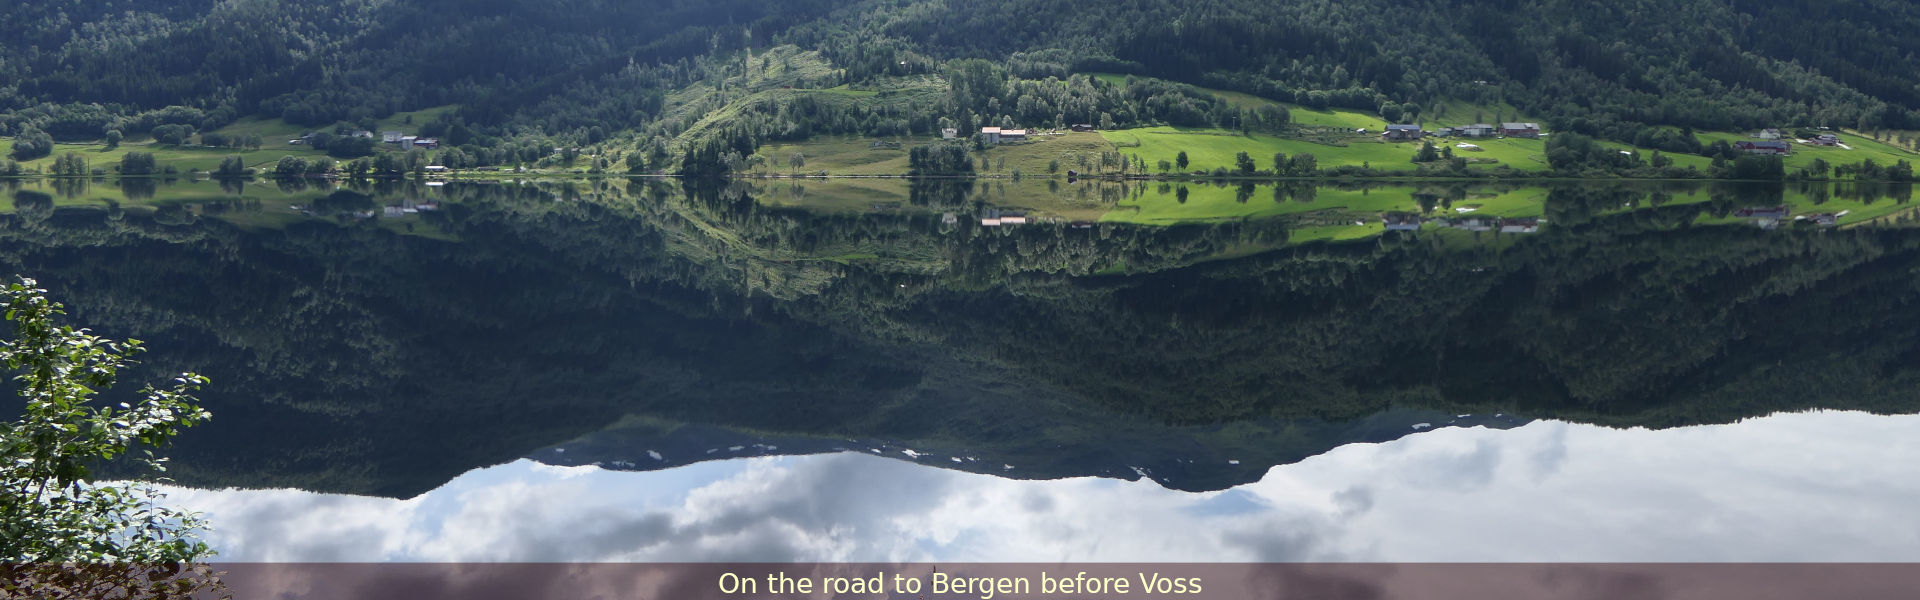 On the road to Bergen before Voss, Norway